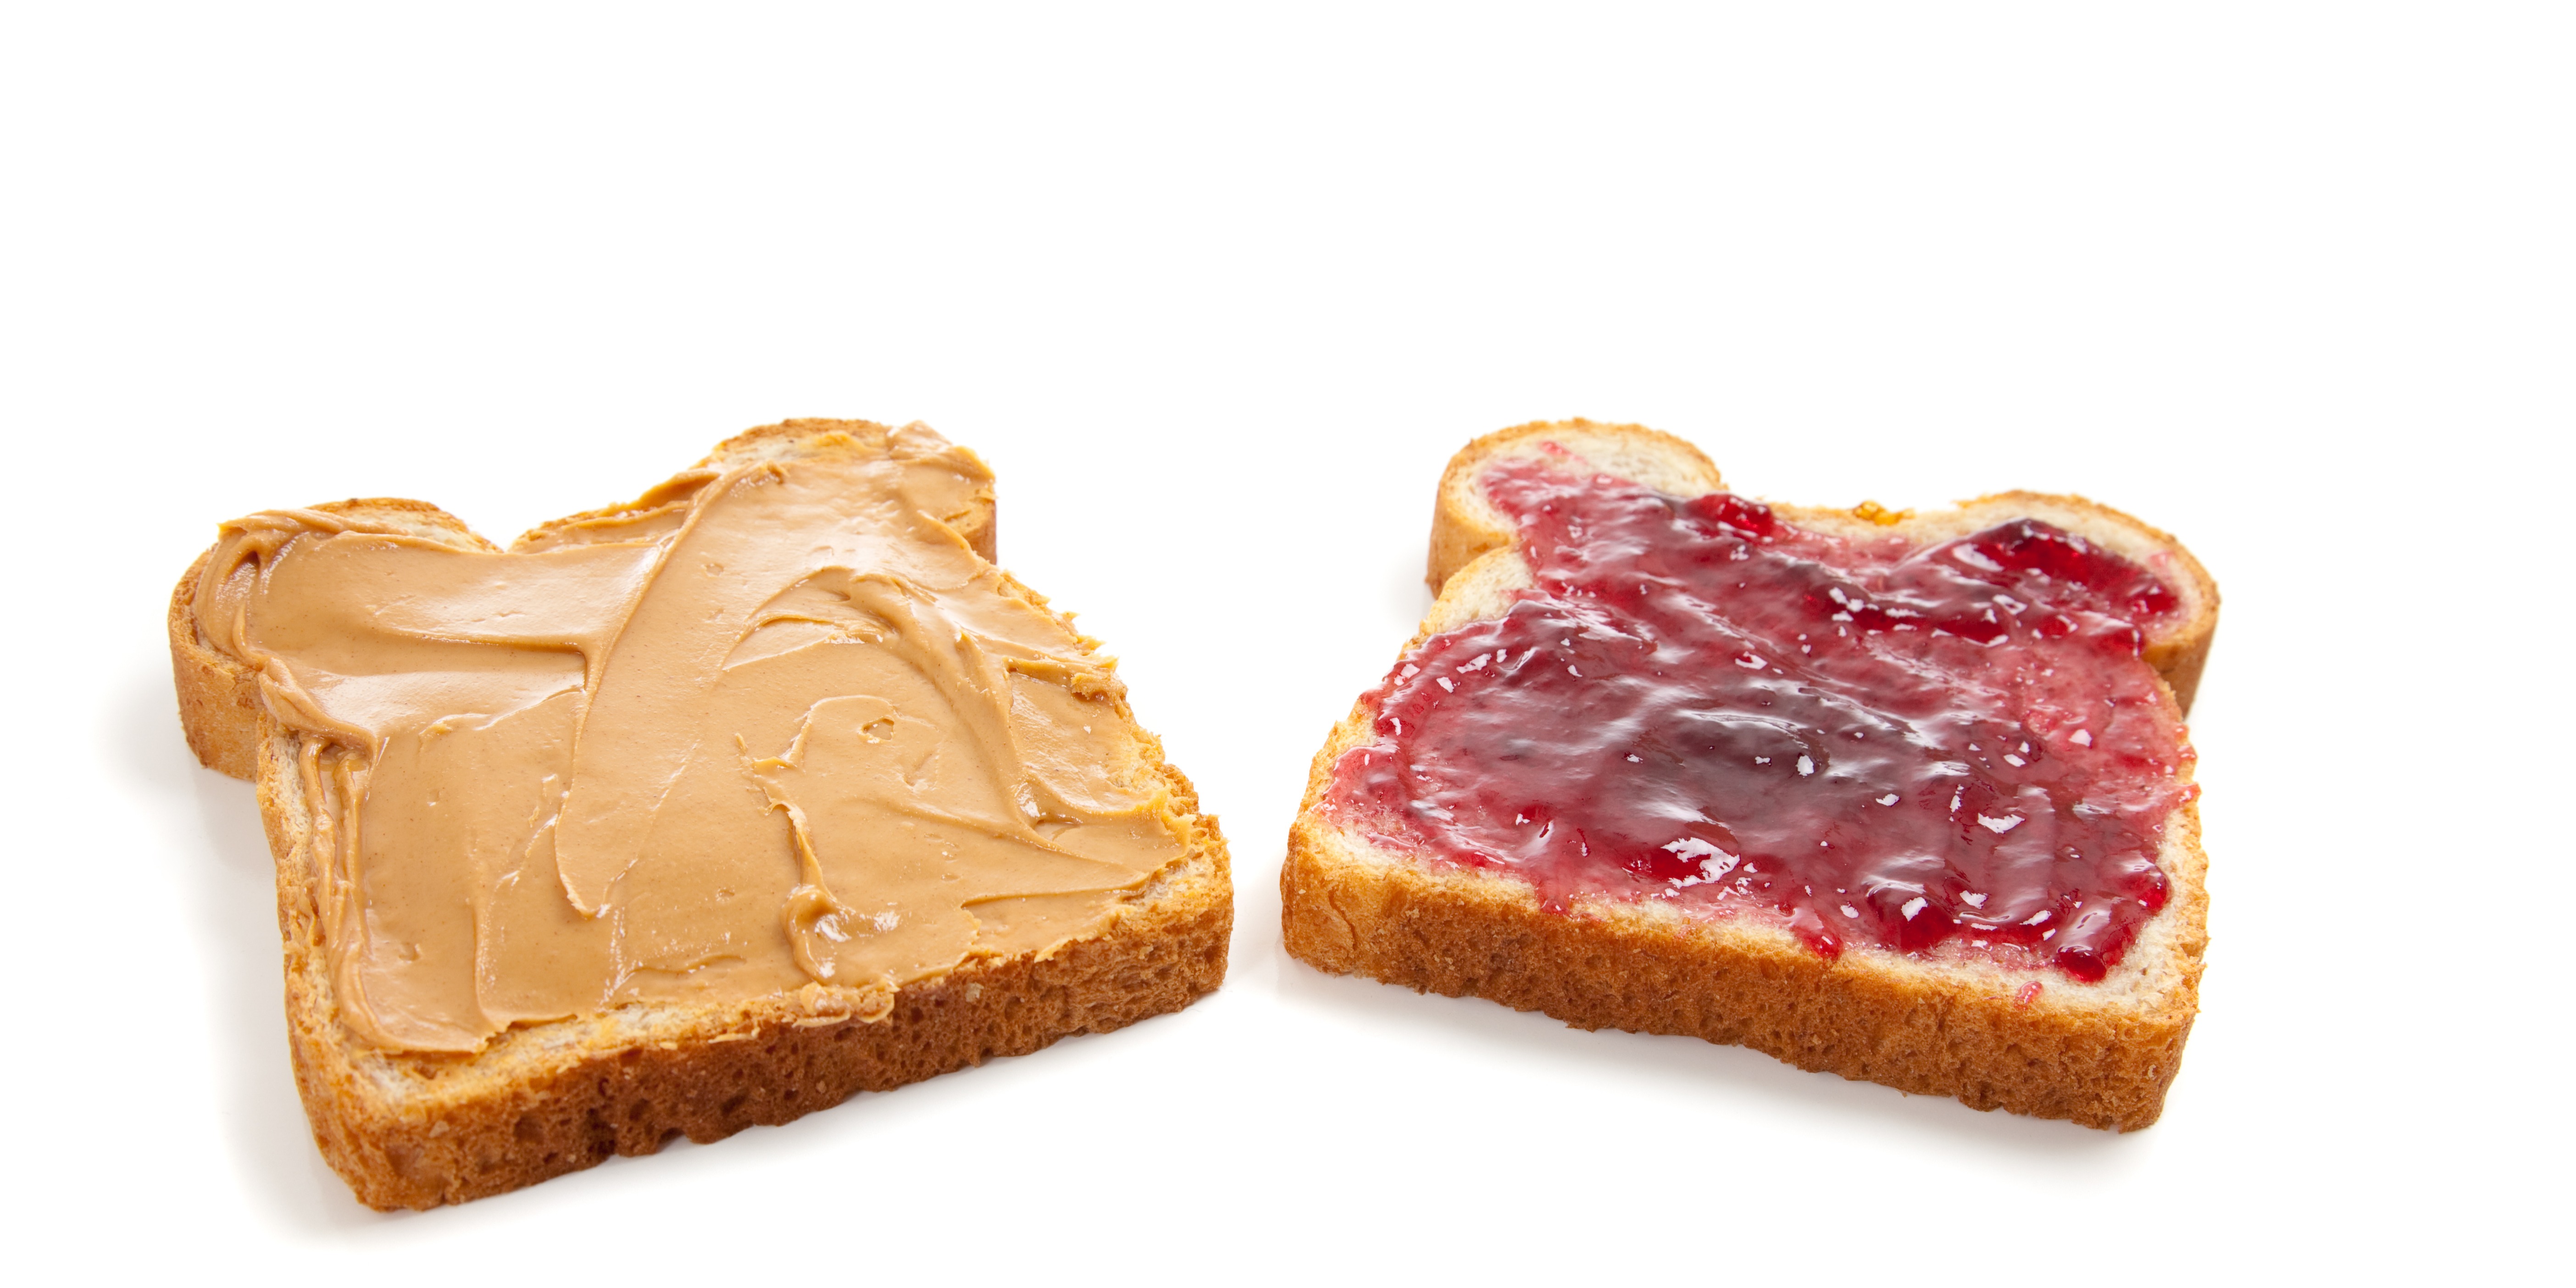 Inbound or Outbound Why They Go Together Like Peanut Butter and Jelly